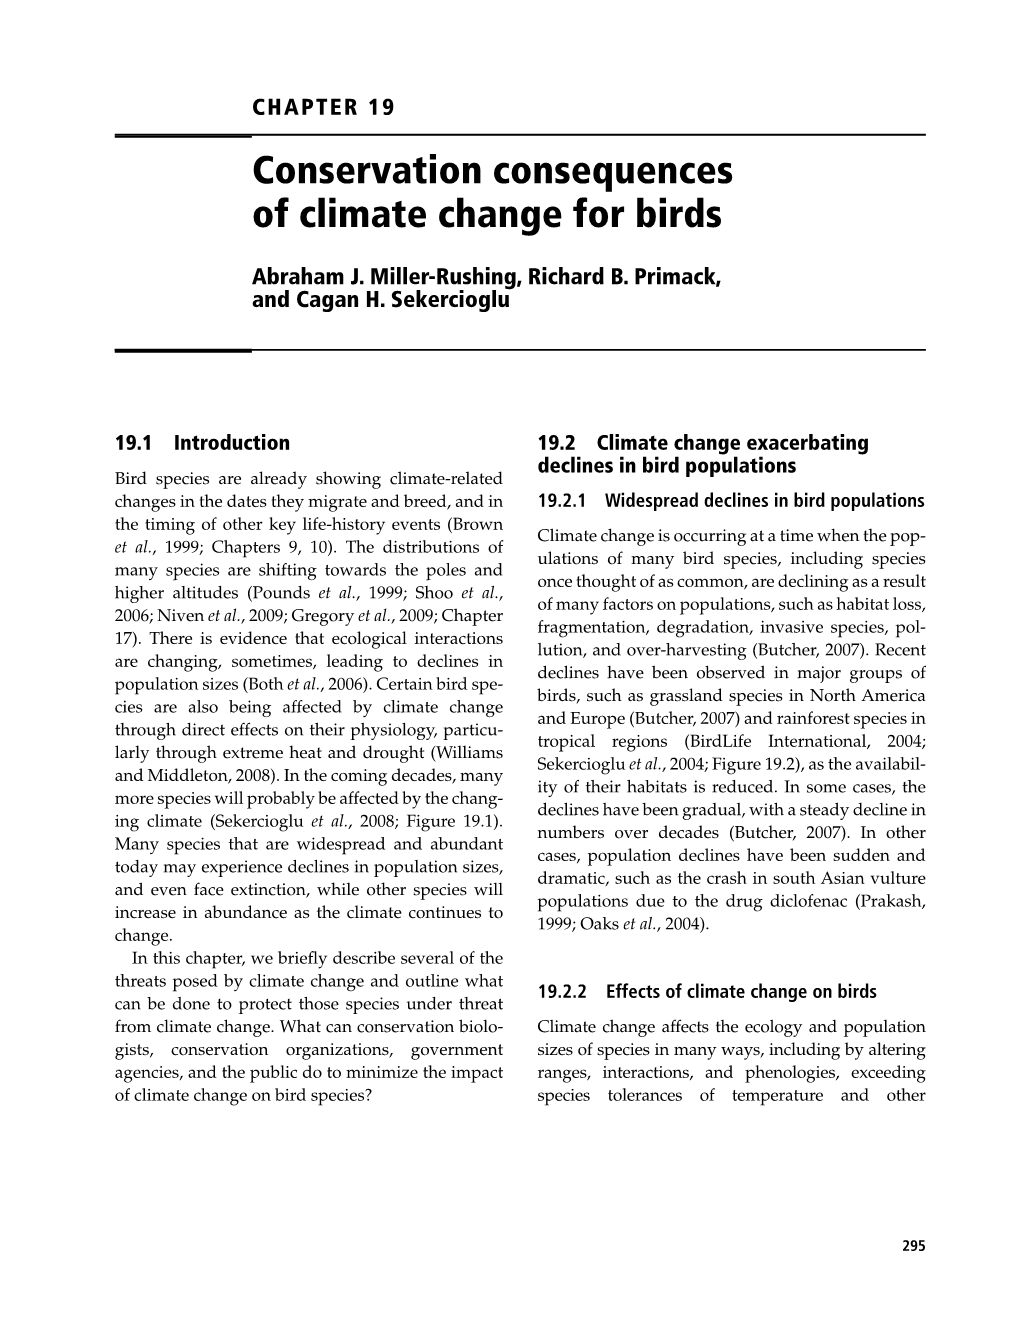 Conservation Consequences of Climate Change for Birds